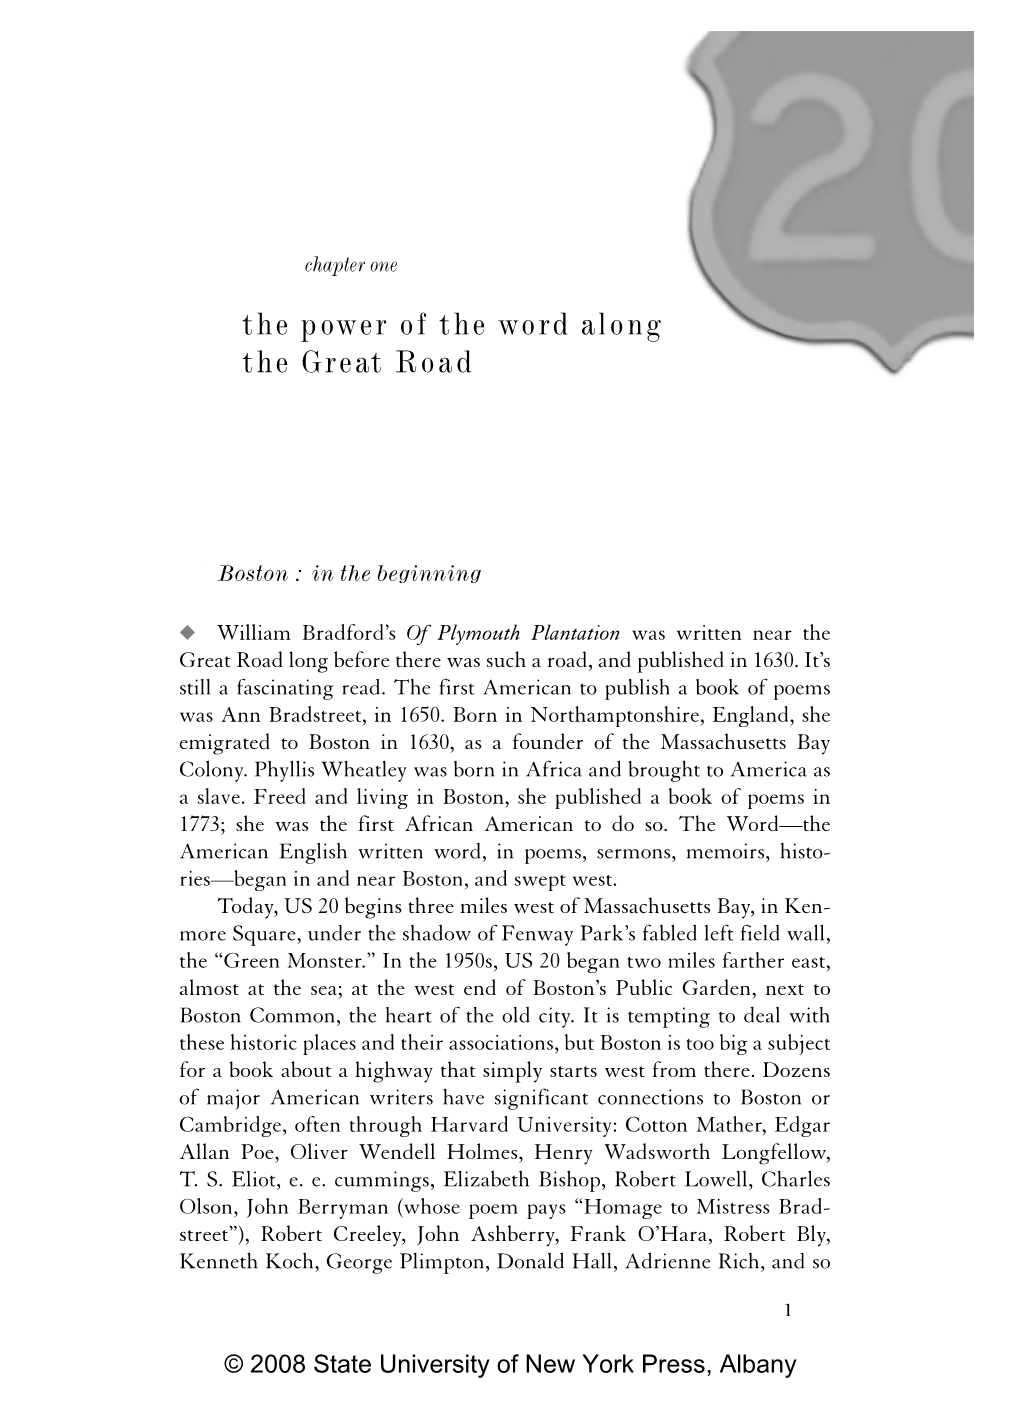 The Power of the Word Along the Great Road